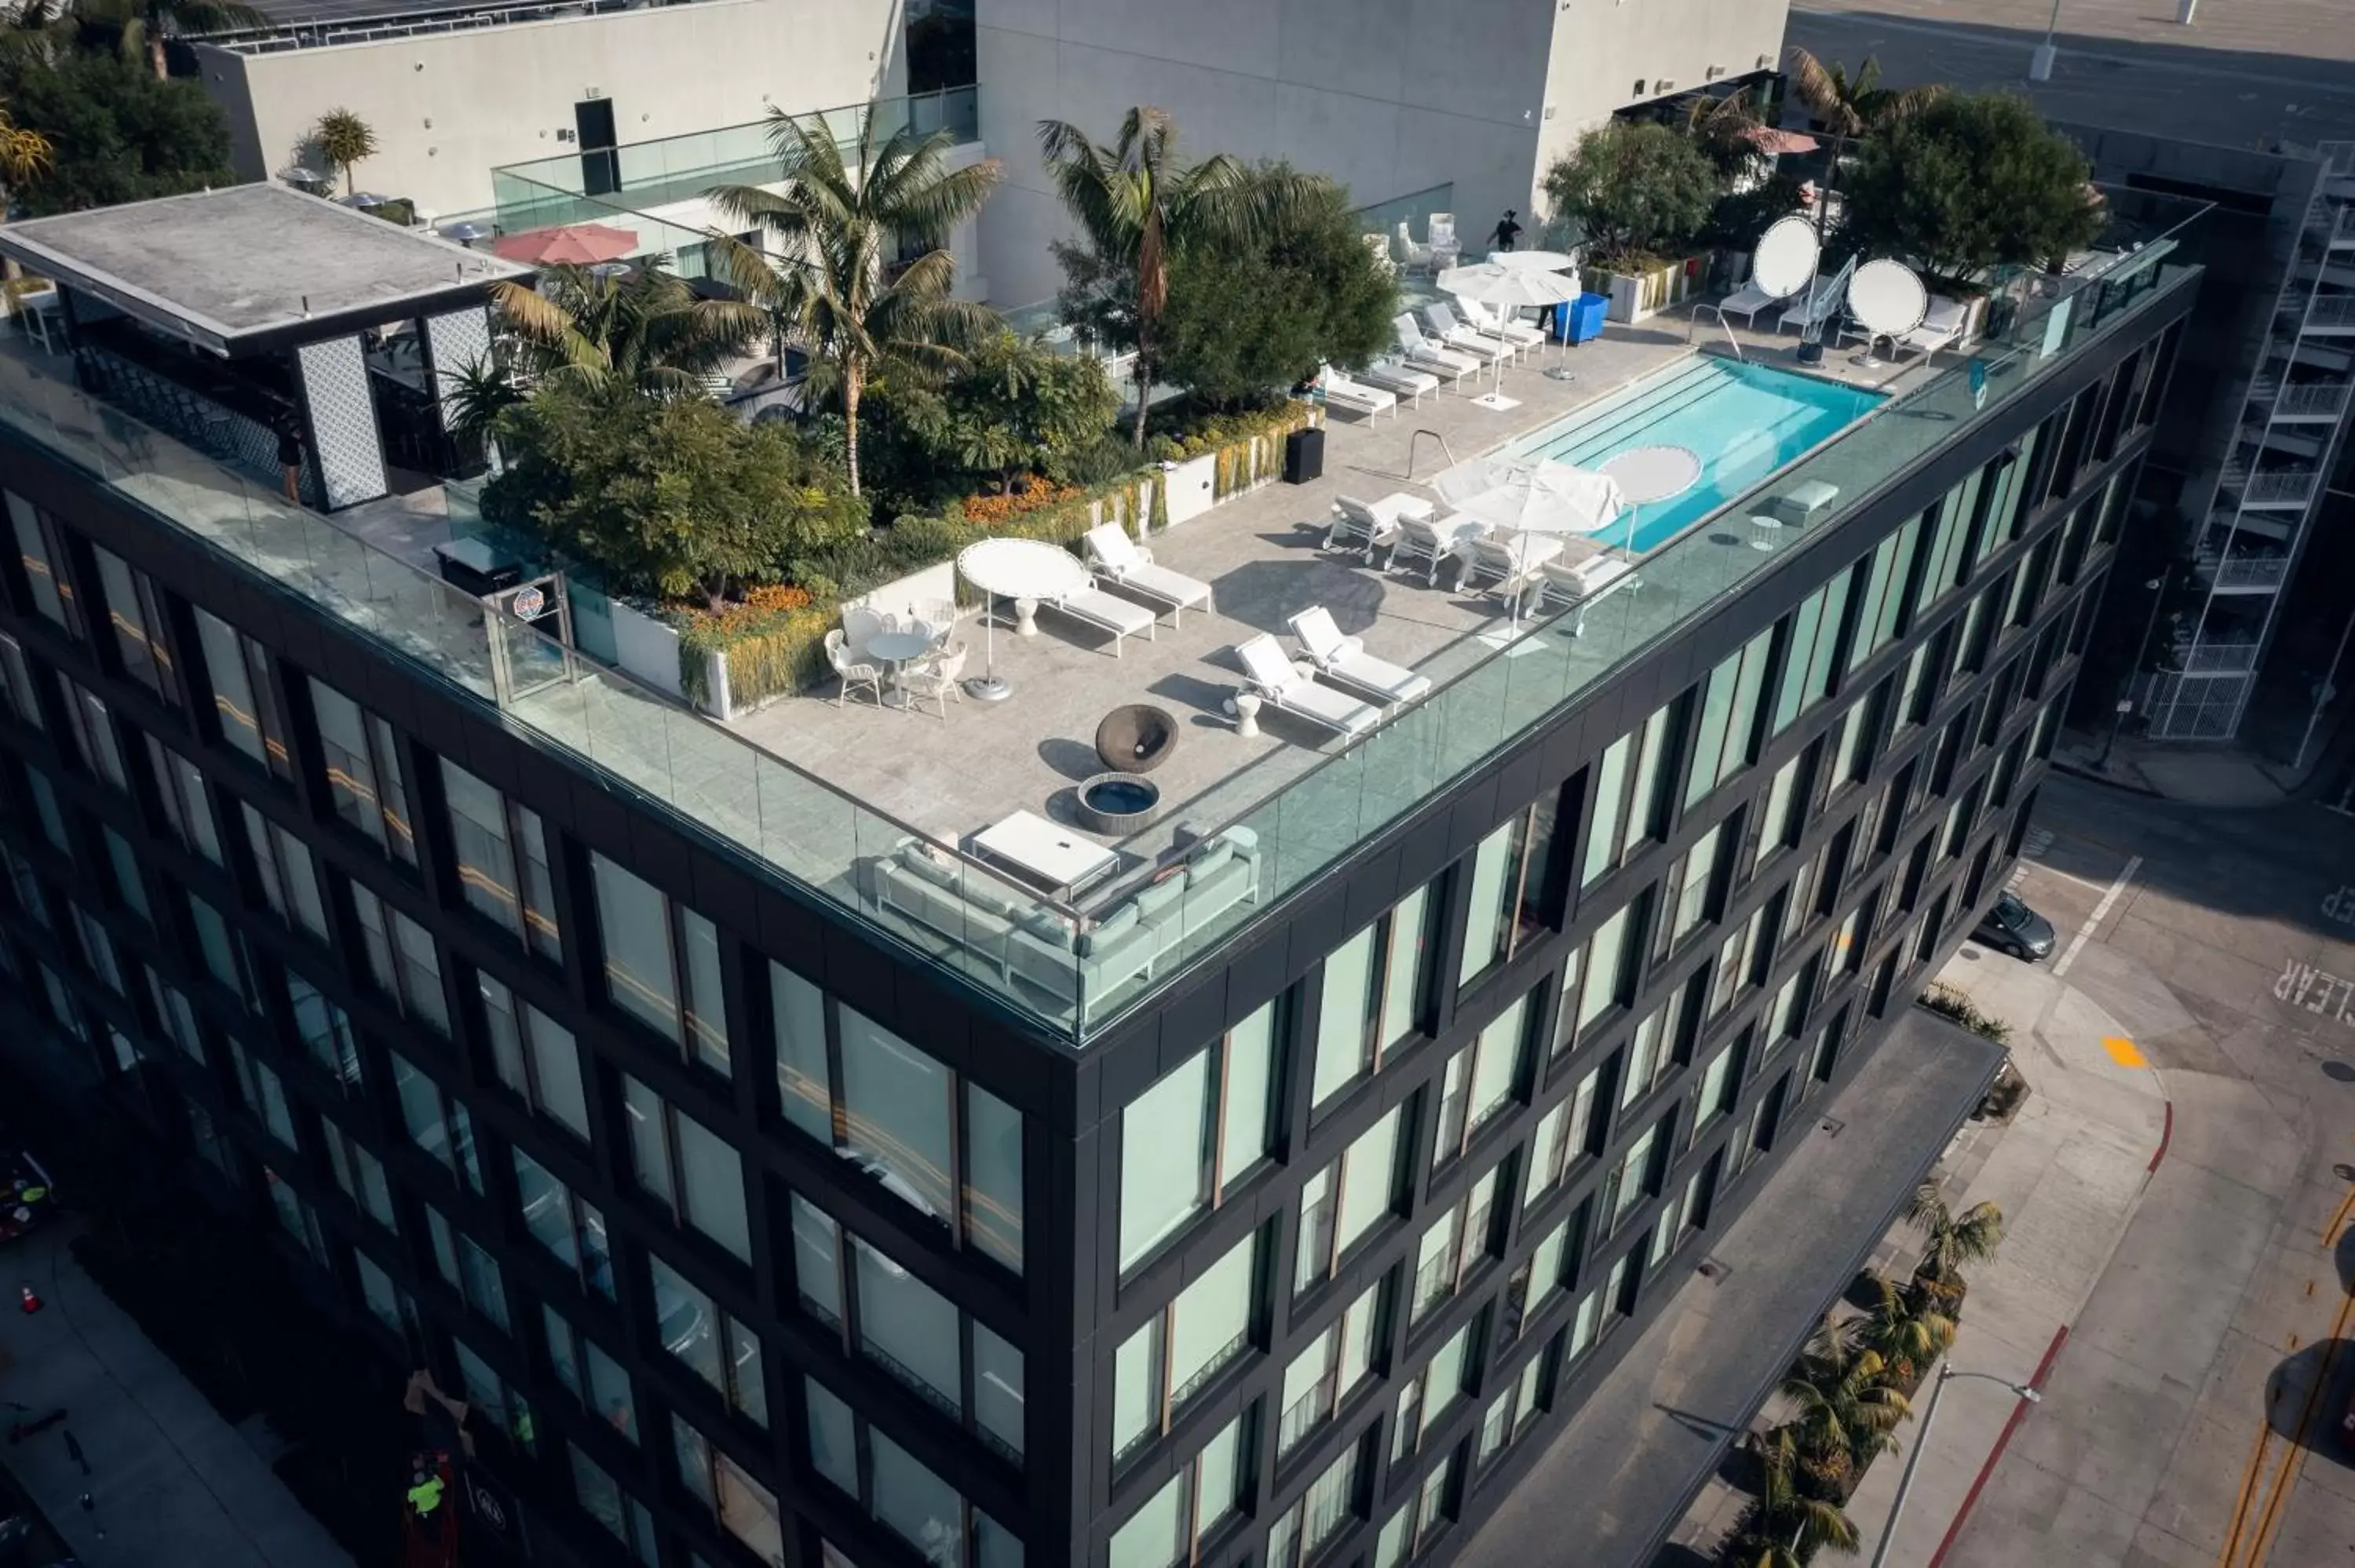 Property building, Pool View in The Godfrey Hotel Hollywood